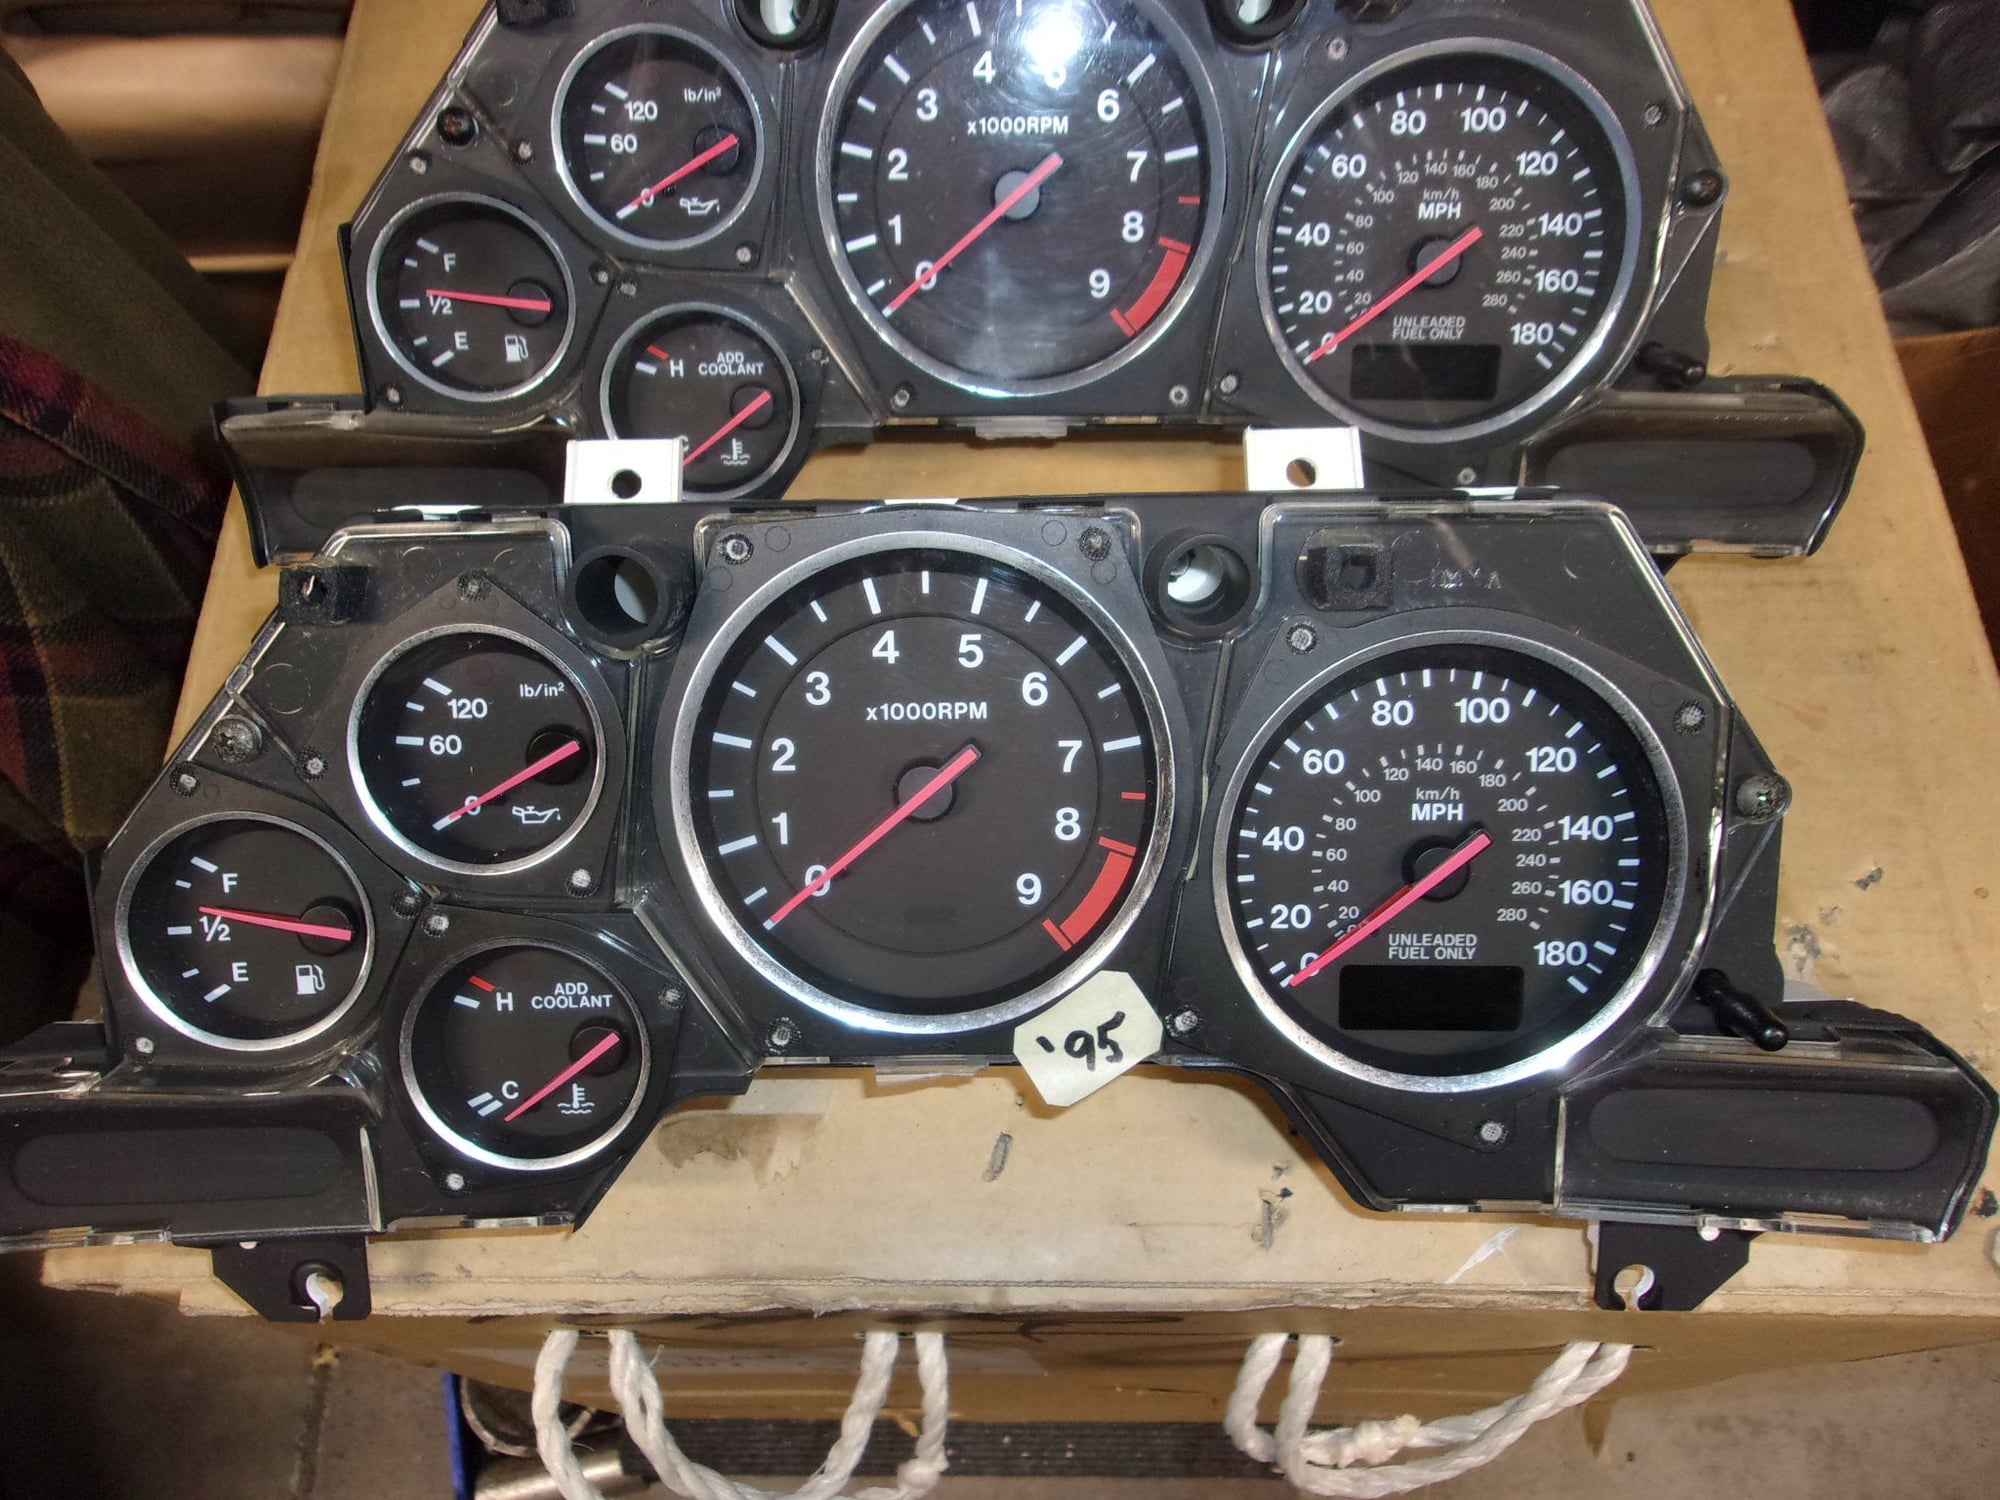 Interior/Upholstery - USDM Manual Gauge Clusters - Used - 1993 to 1995 Mazda RX-7 - Murfreesboro, TN 37130, United States